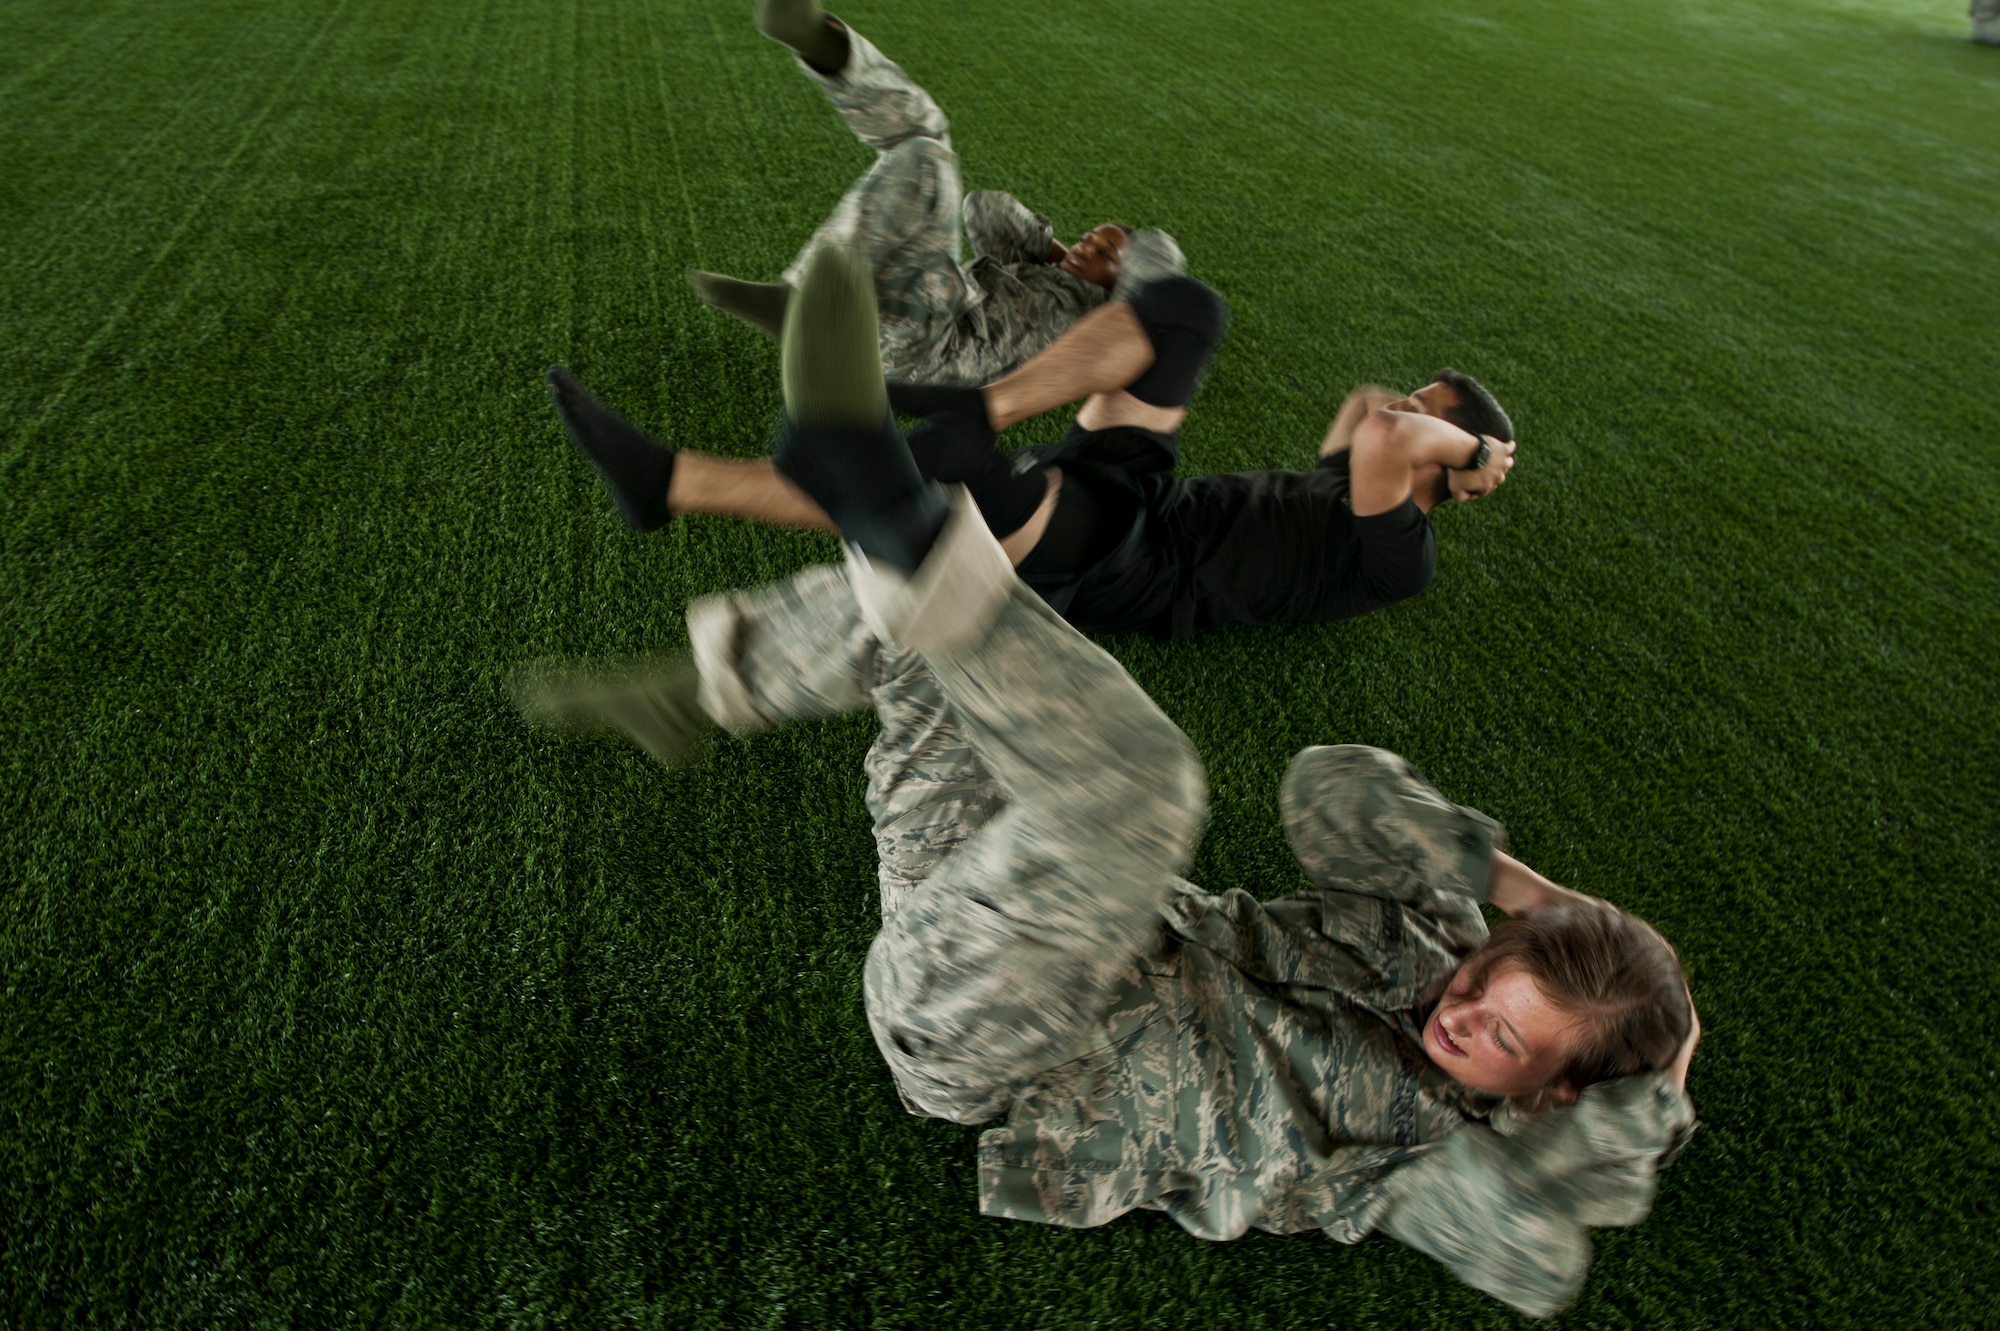 Two Air Force Reserve Officer Training Corps cadets perform bicycle kicks with guidance from an instructor during combatives training on Maxwell Air Force Base, May 29, 2014. The cadets performed a series of calisthenics exercises before sparring to increase their level of fatigue, in an effort to improve stamina and simulate real world hand-to-hand combat conditions. (U.S. Air Force Photo by Staff Sgt. Gregory Brook)